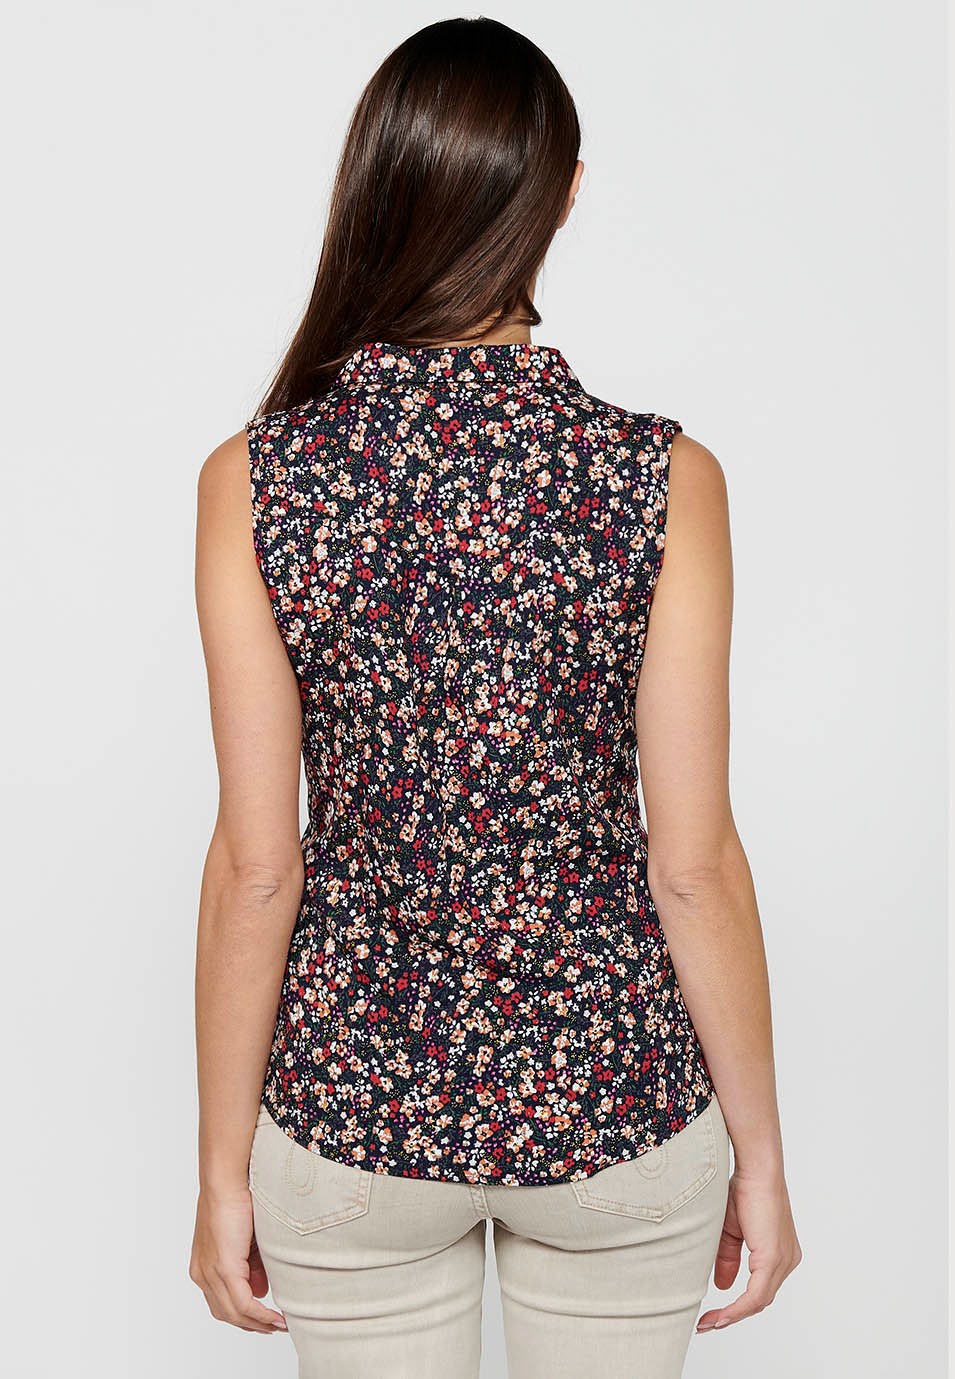 Sleeveless blouse, V-neck, front closure with buttons, floral print for women in Navy 5